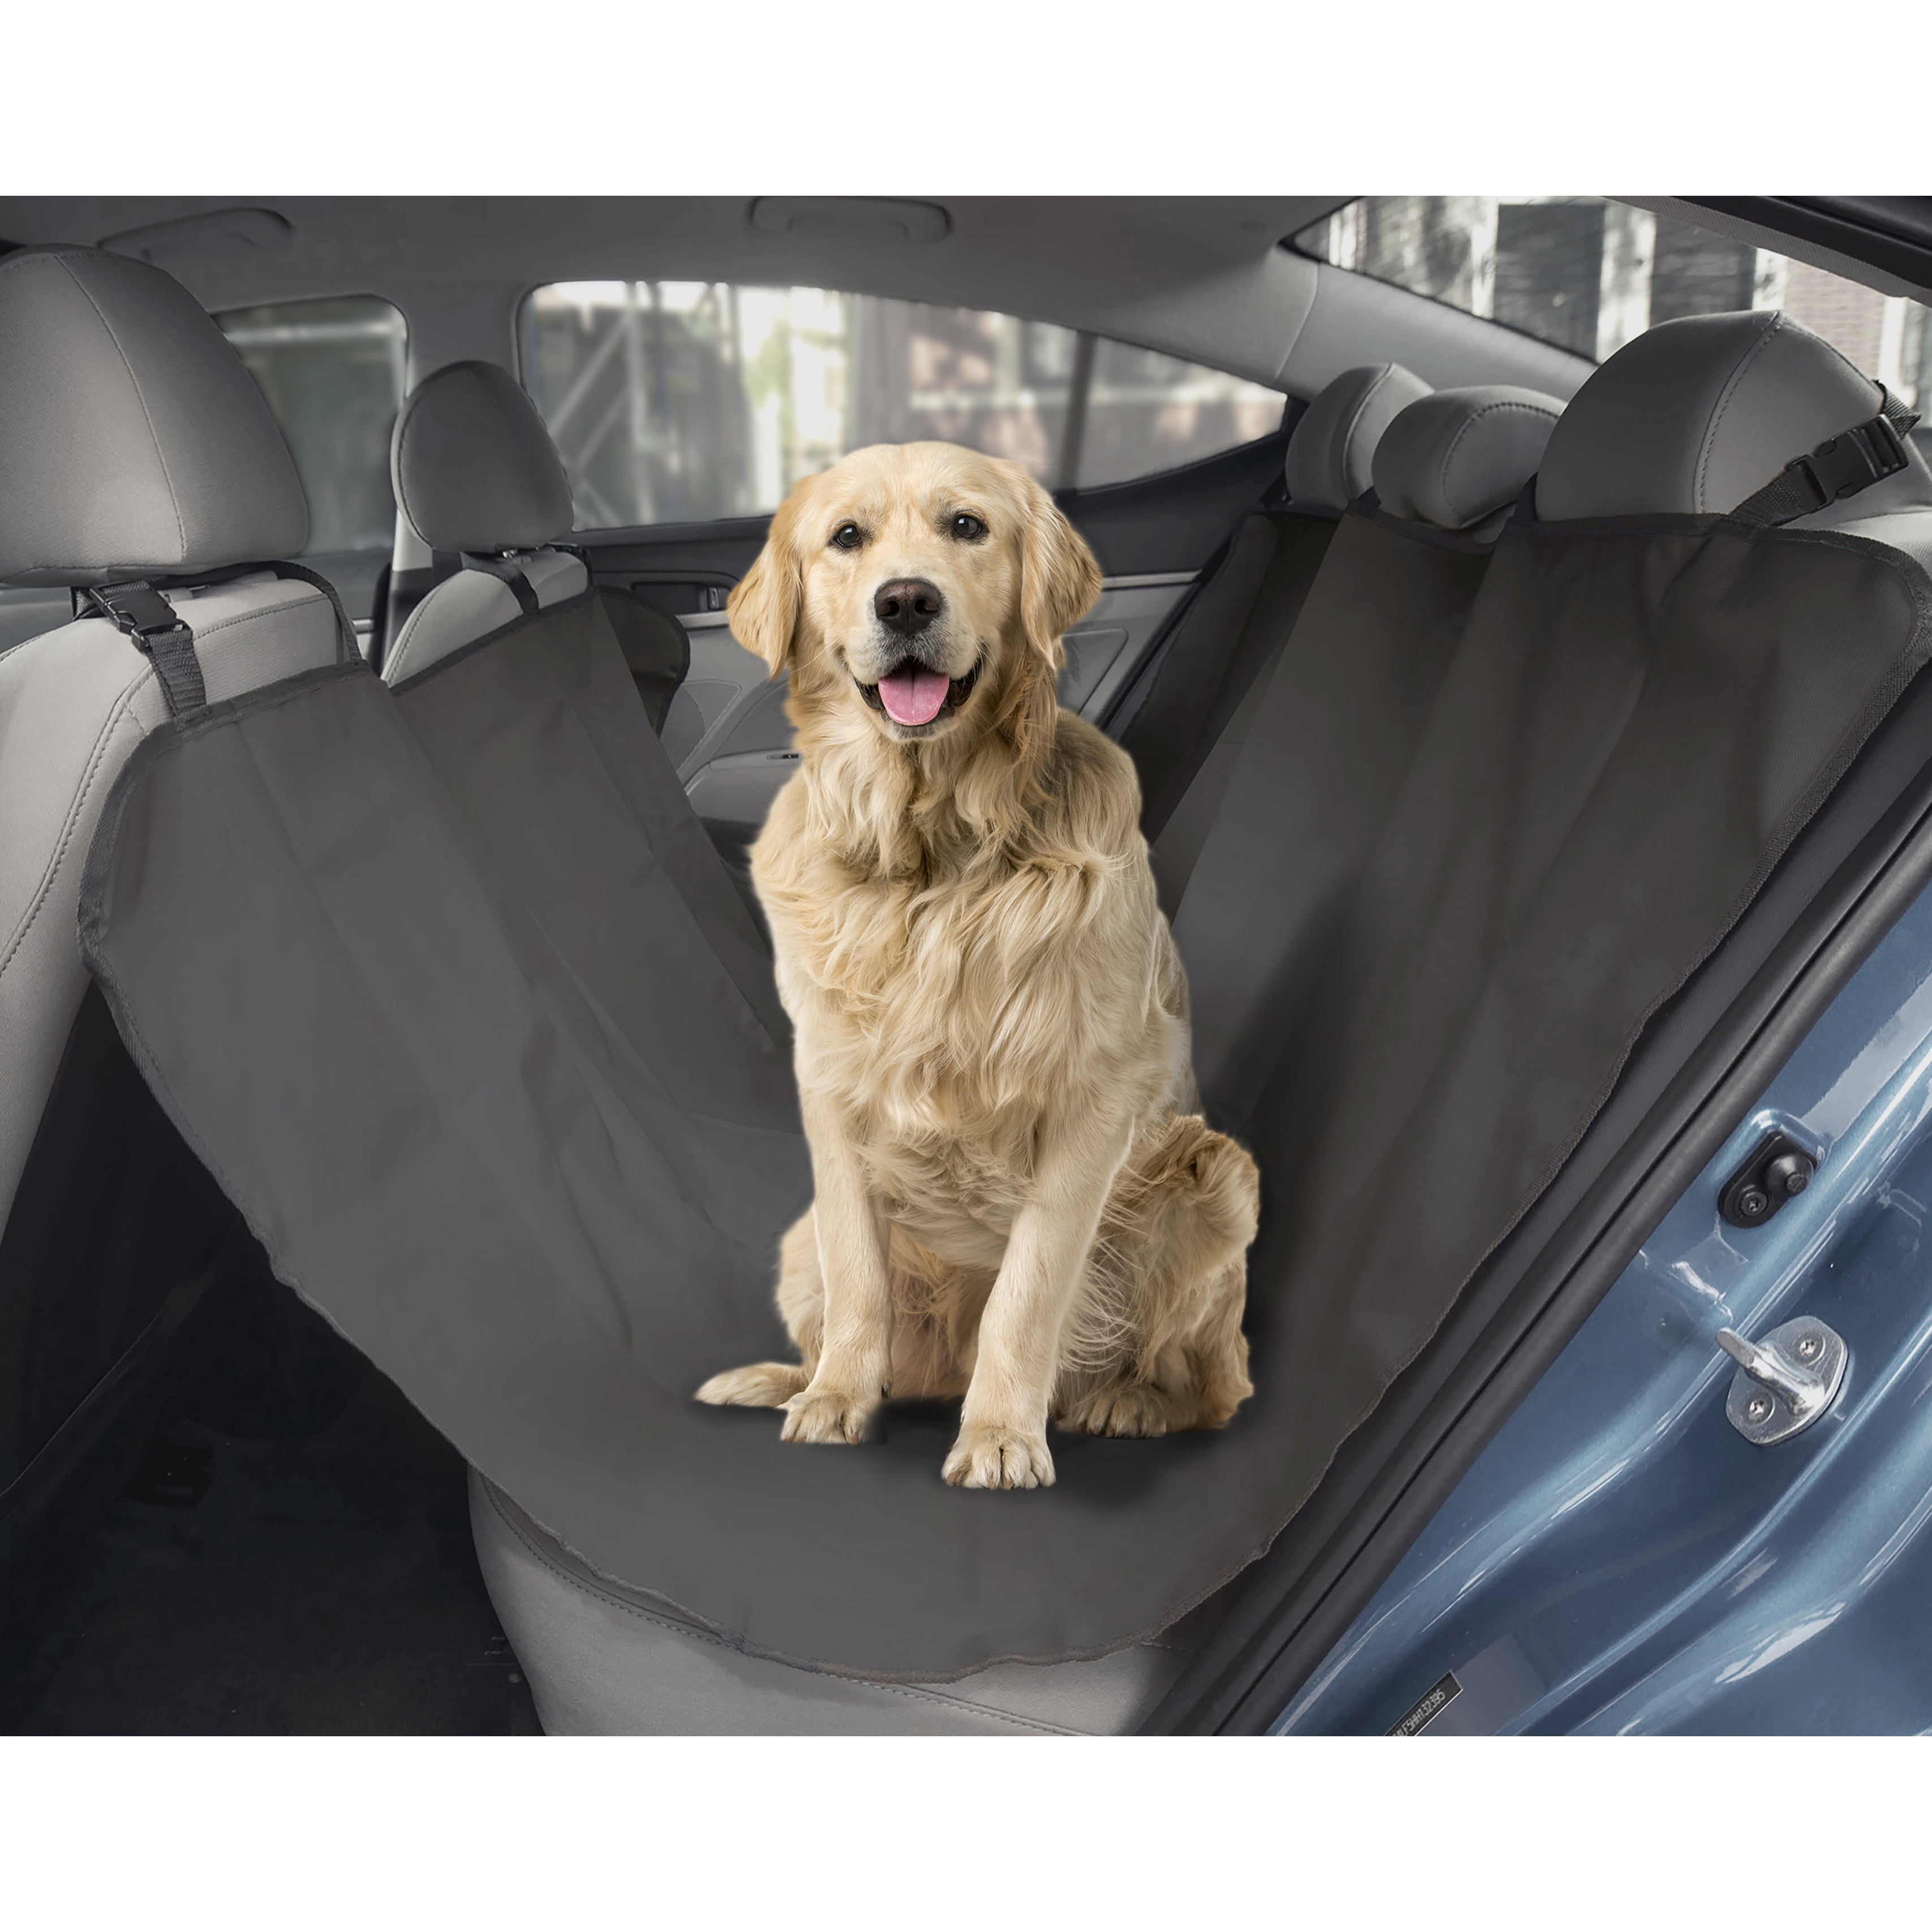 Precious Tails Co-Pilot Waterproof Dog Car Seat Cover, Grey, Large, 53